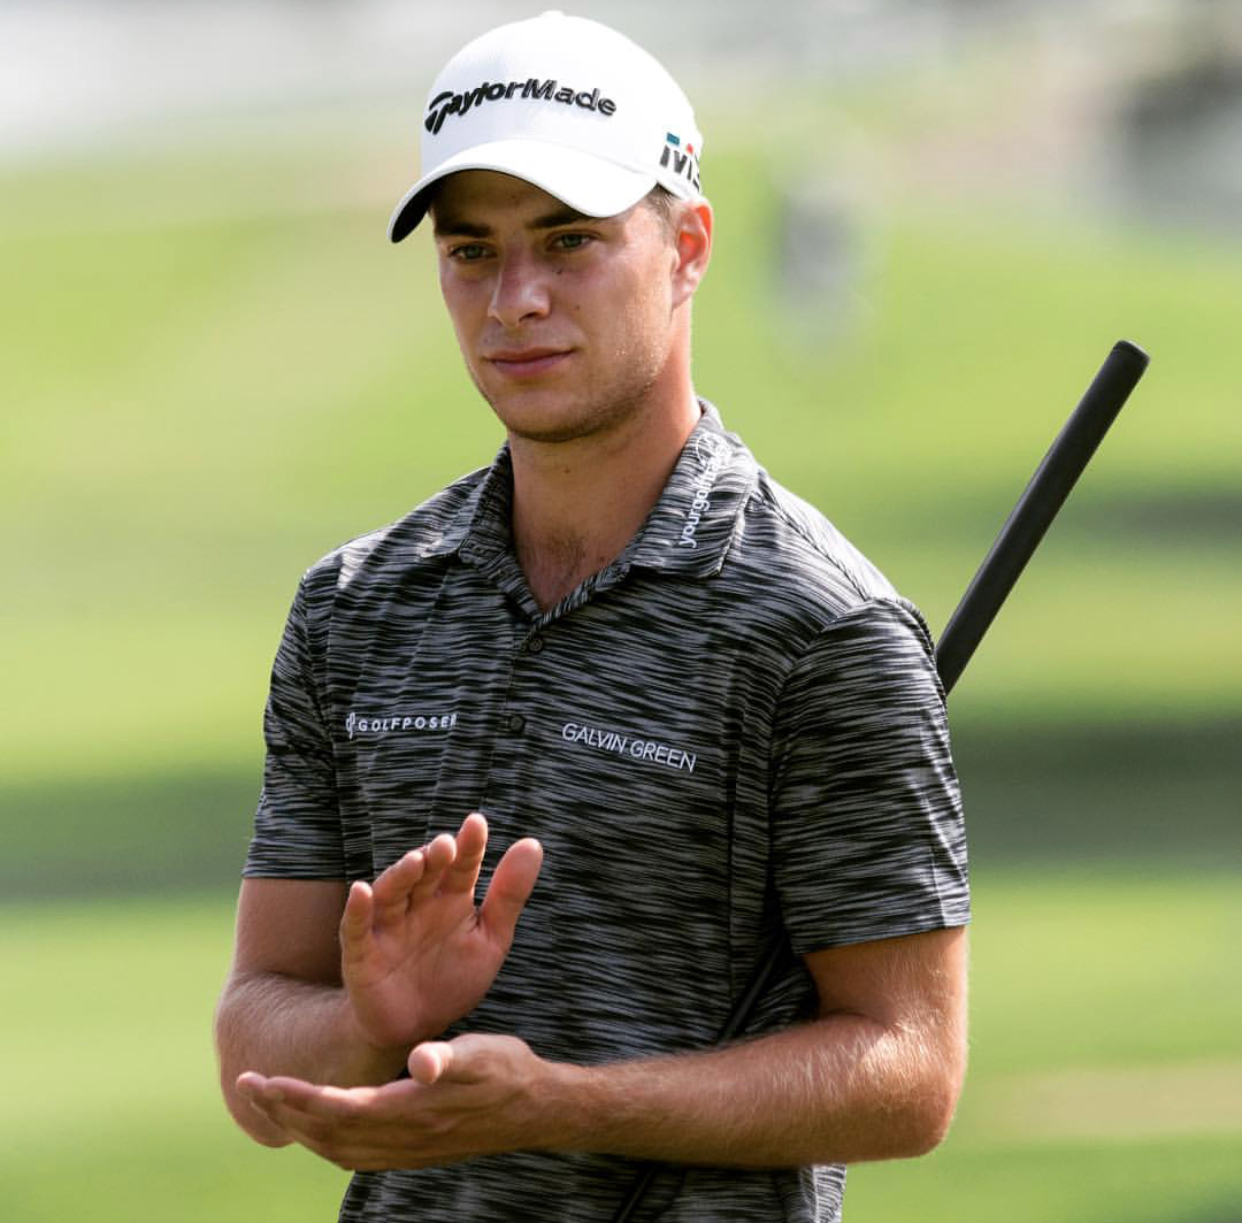 Guido Migliozzi earns European Tour card: My dream is now reality